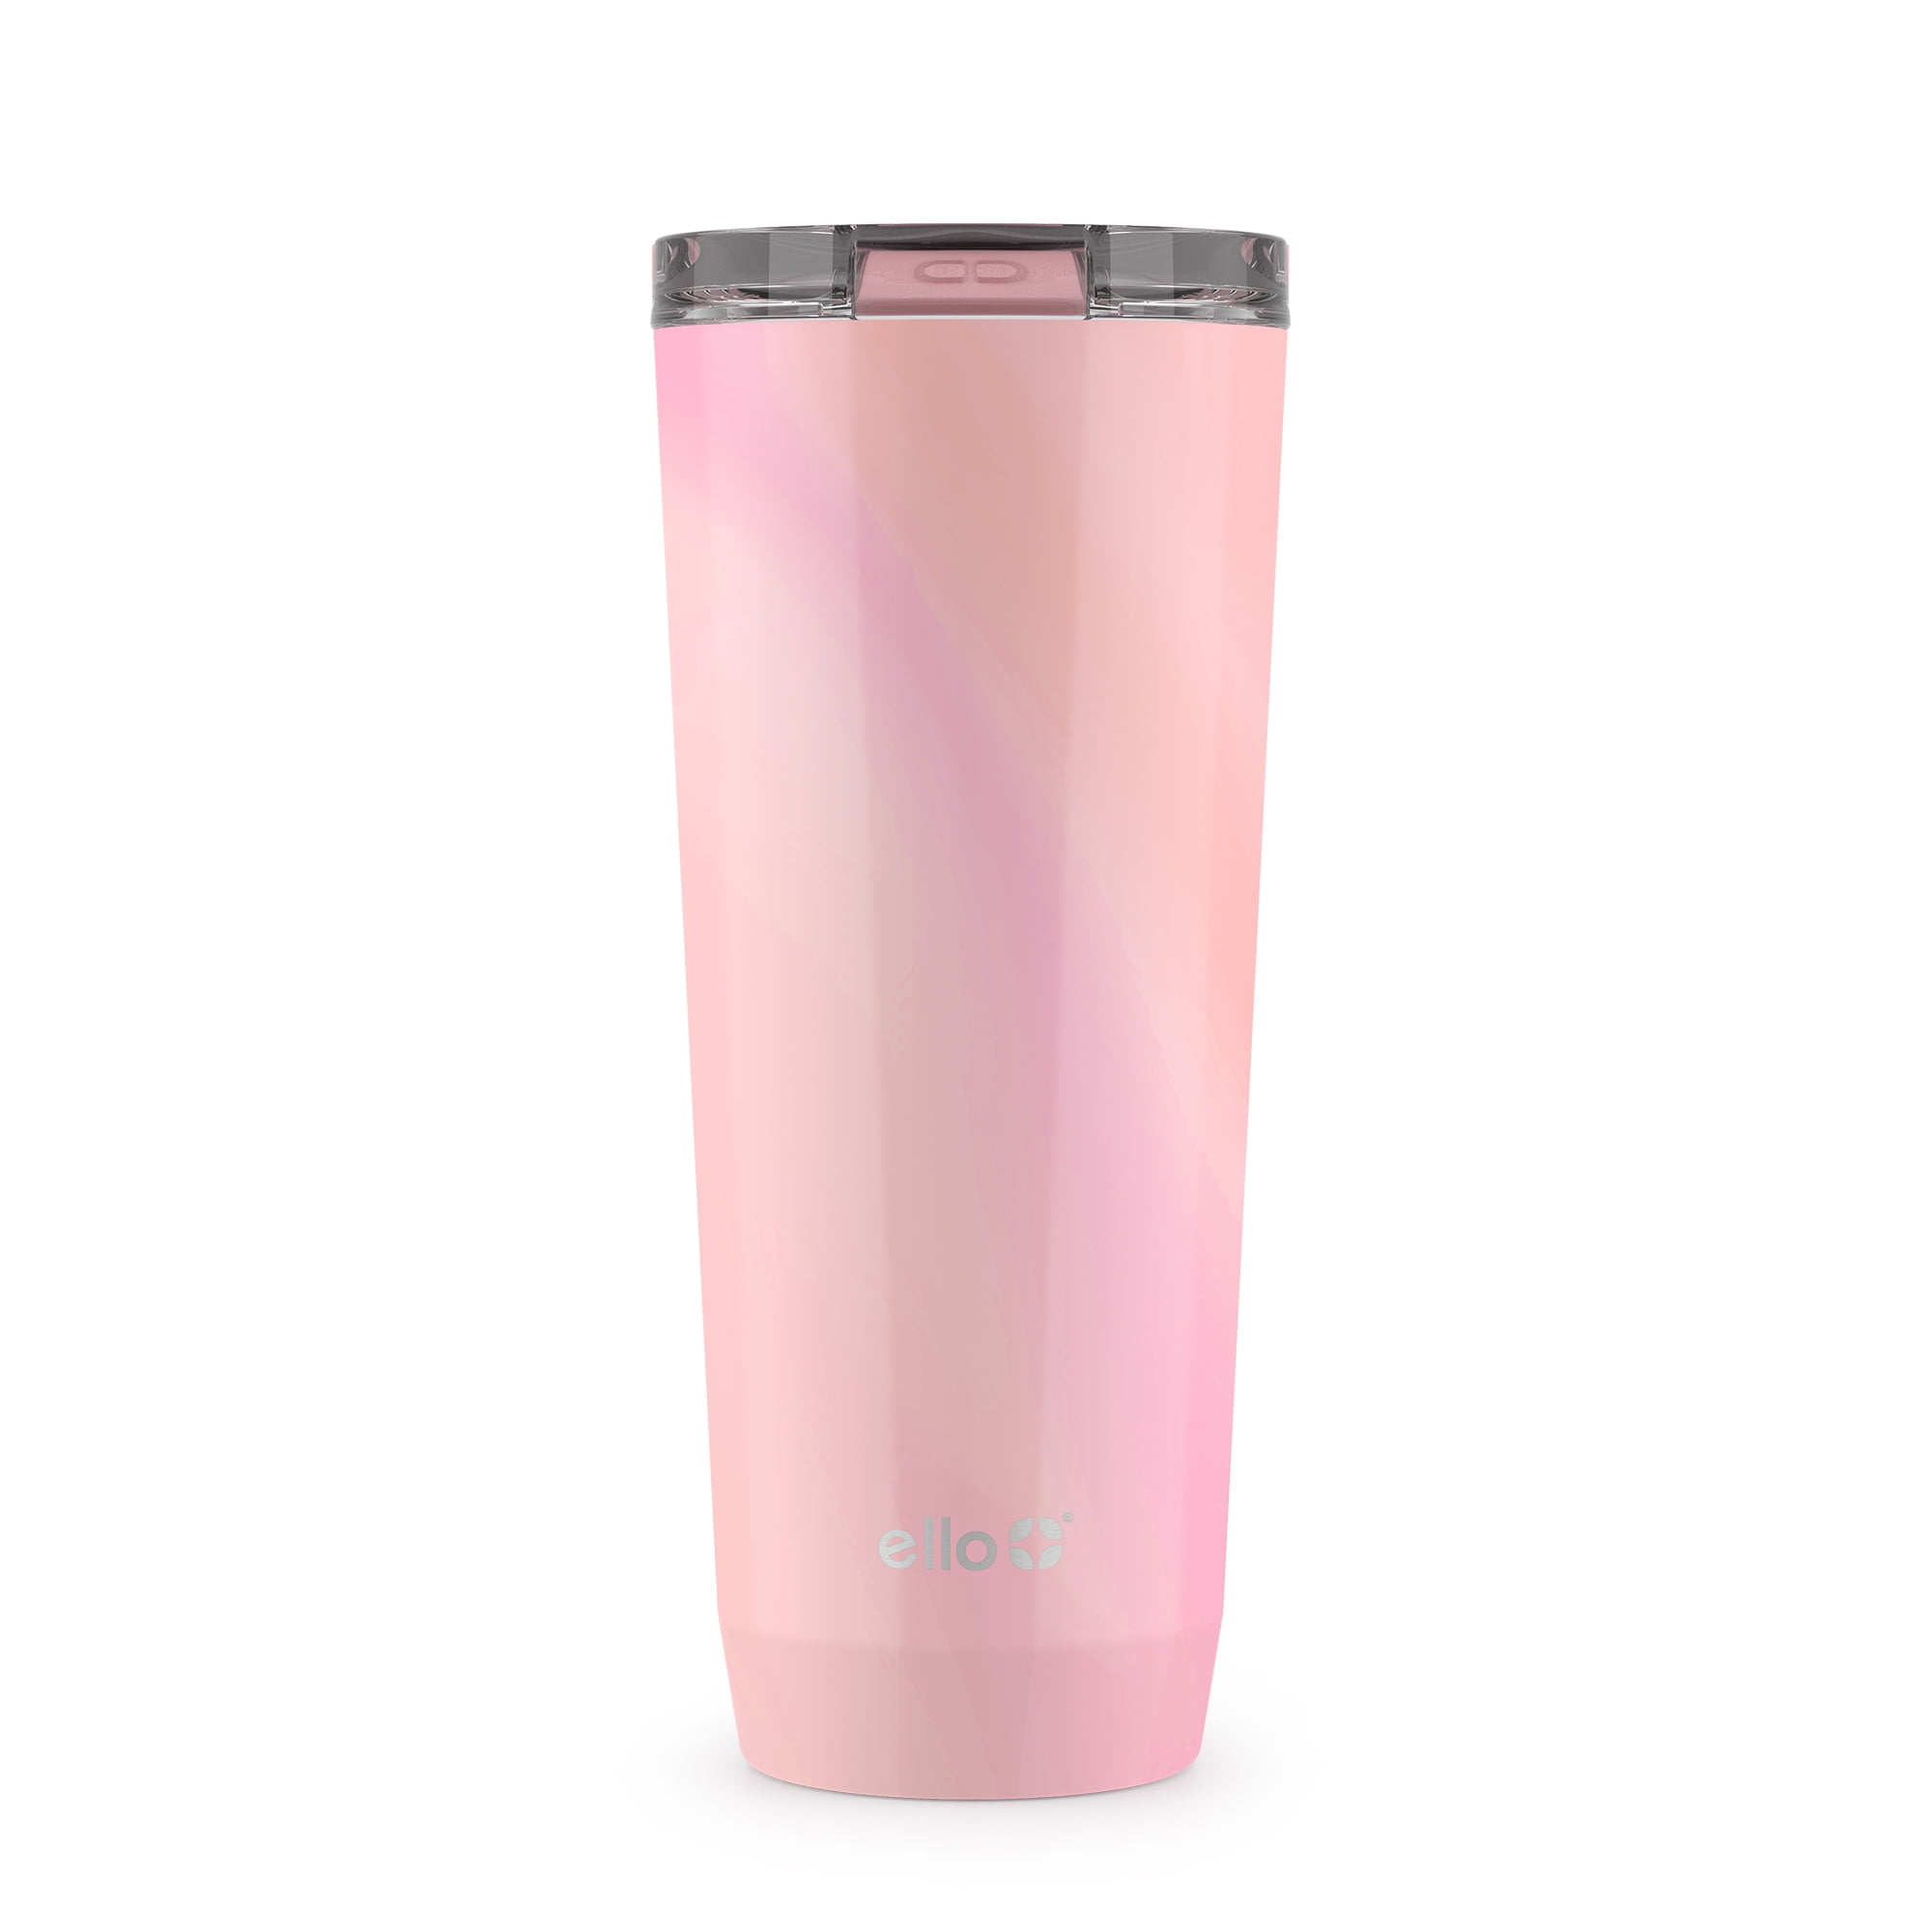 Ello Beacon Vacuum Insulated Stainless Steel Tumbler, Cashmere Pink, 24 oz.  